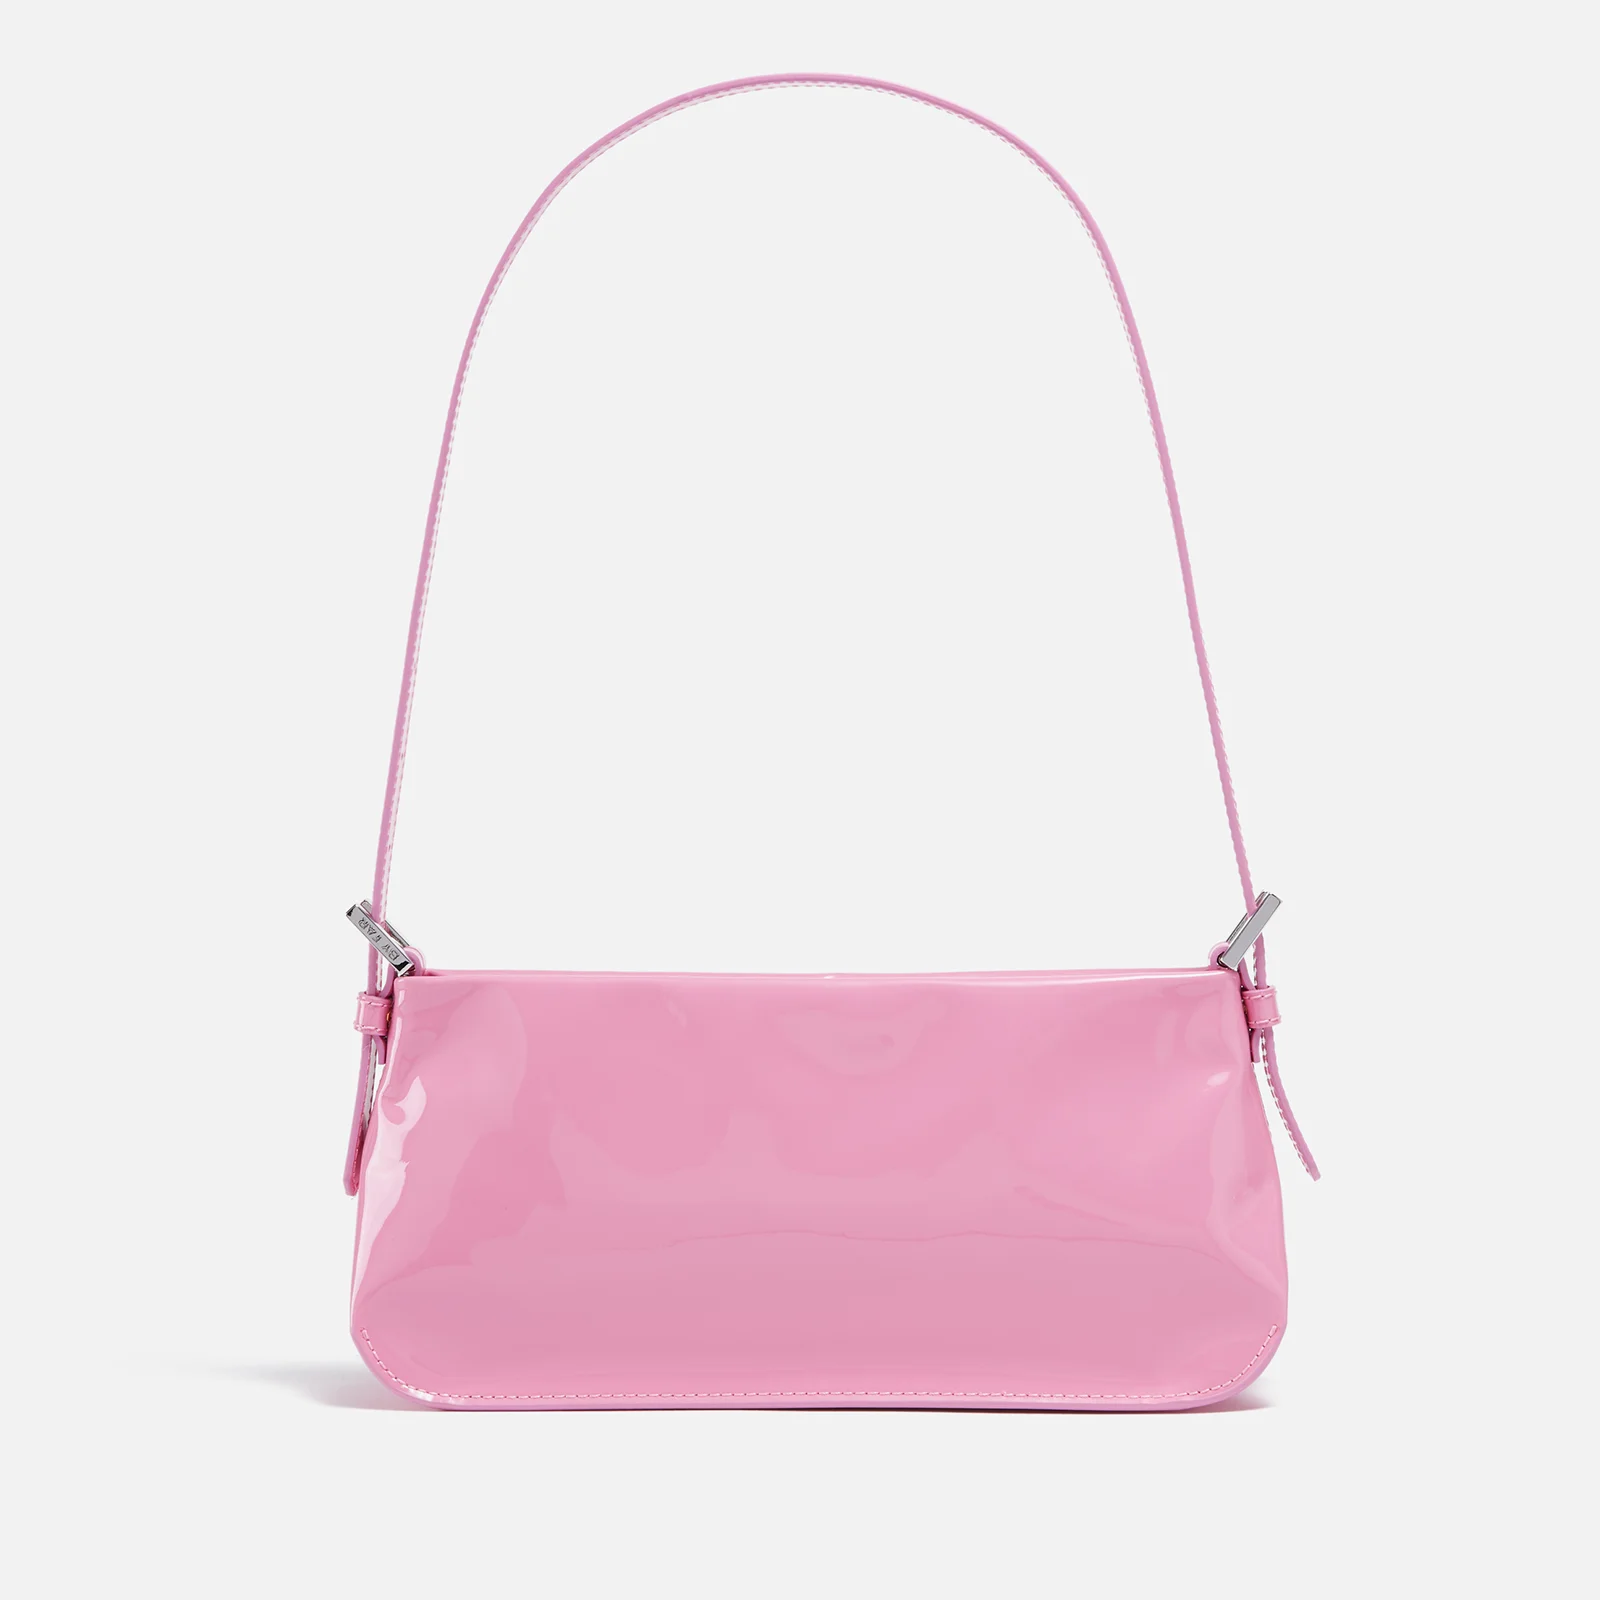 BY FAR Dulce Patent-Leather Shoulder Bag Image 1